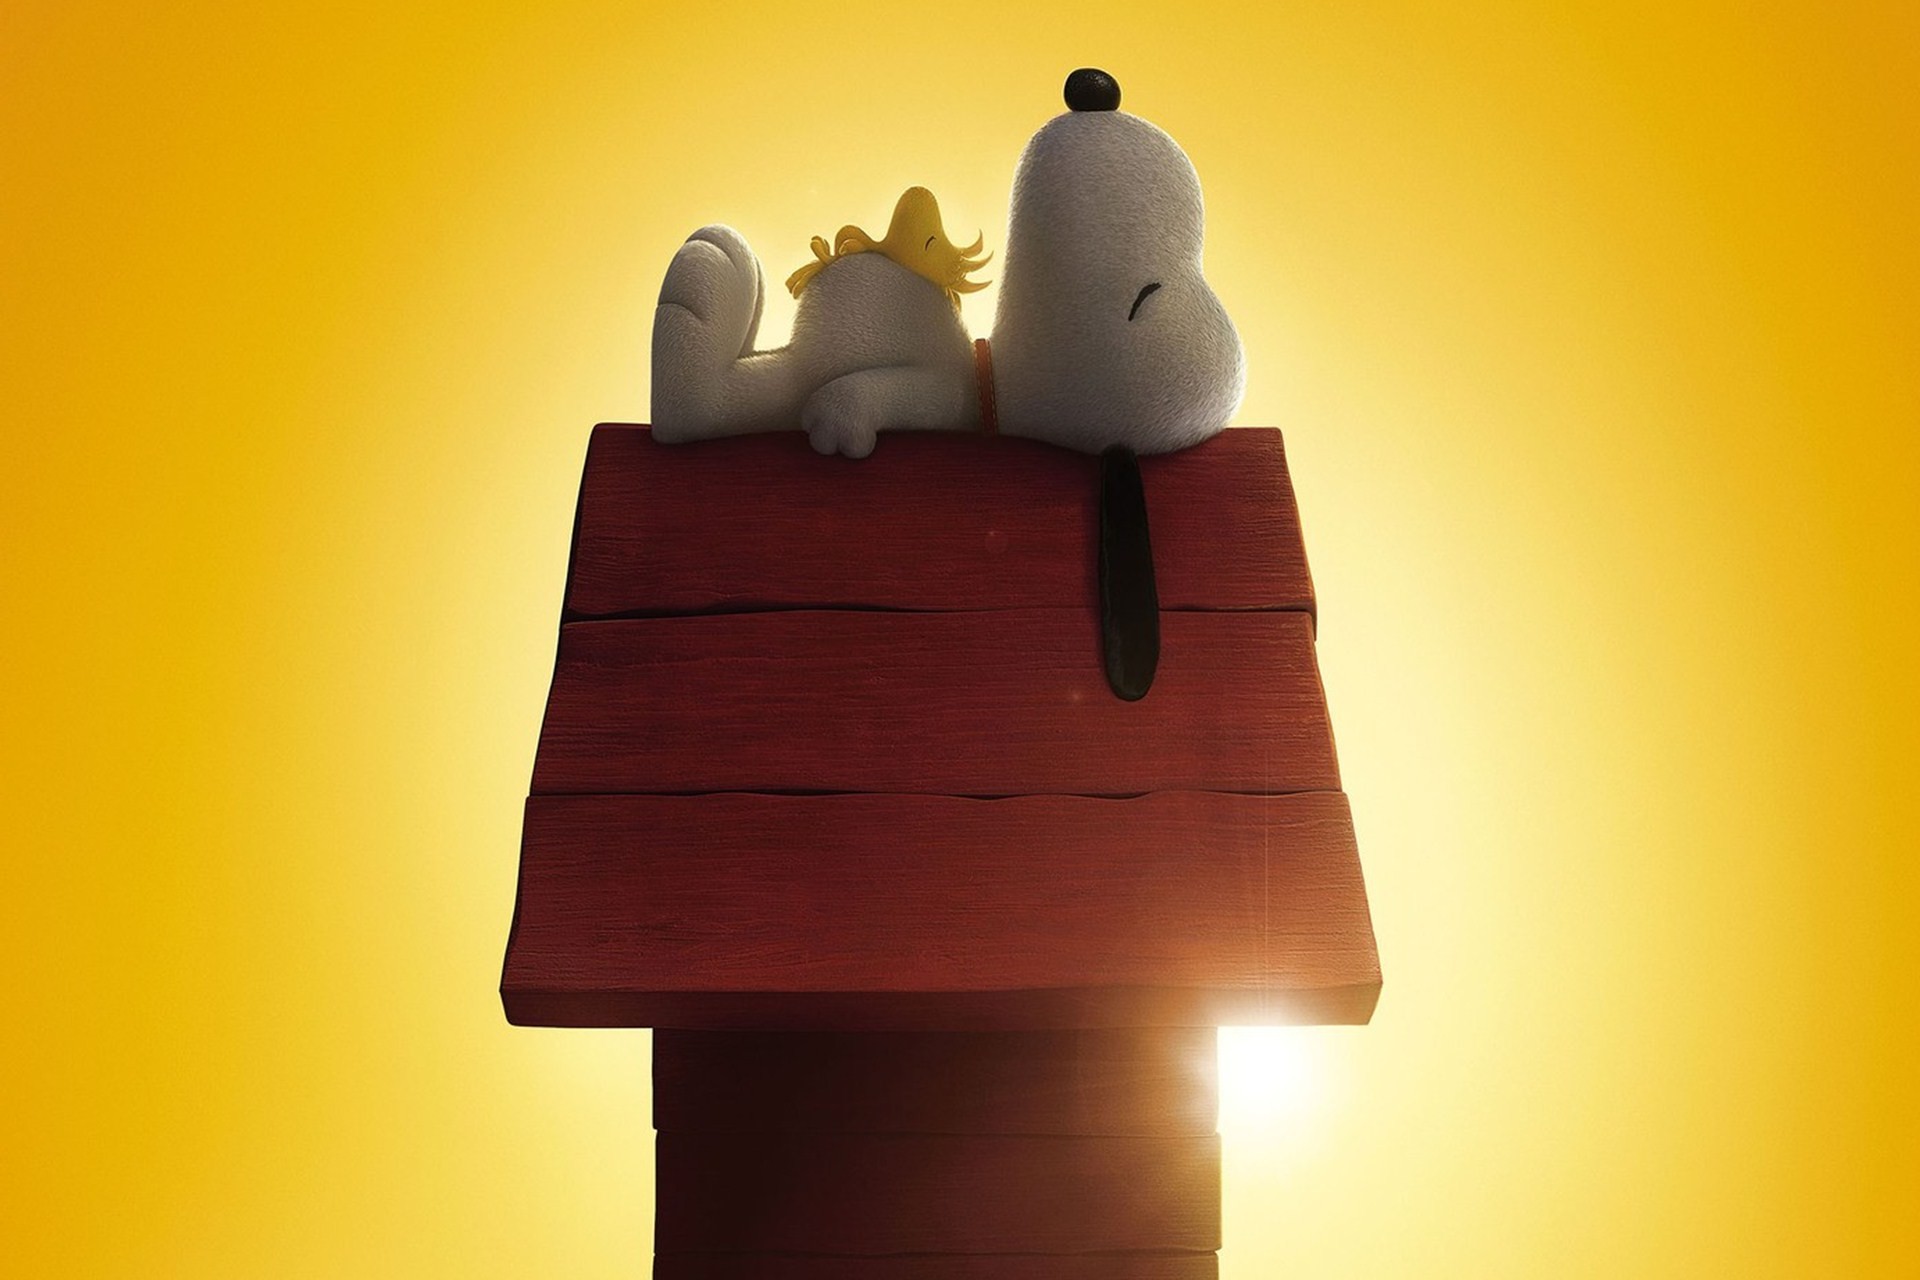 Snoopy HD Wallpapers Backgrounds Wallpaper 1024768 Imagenes De Snoopy Wallpapers 36 Wallpapers